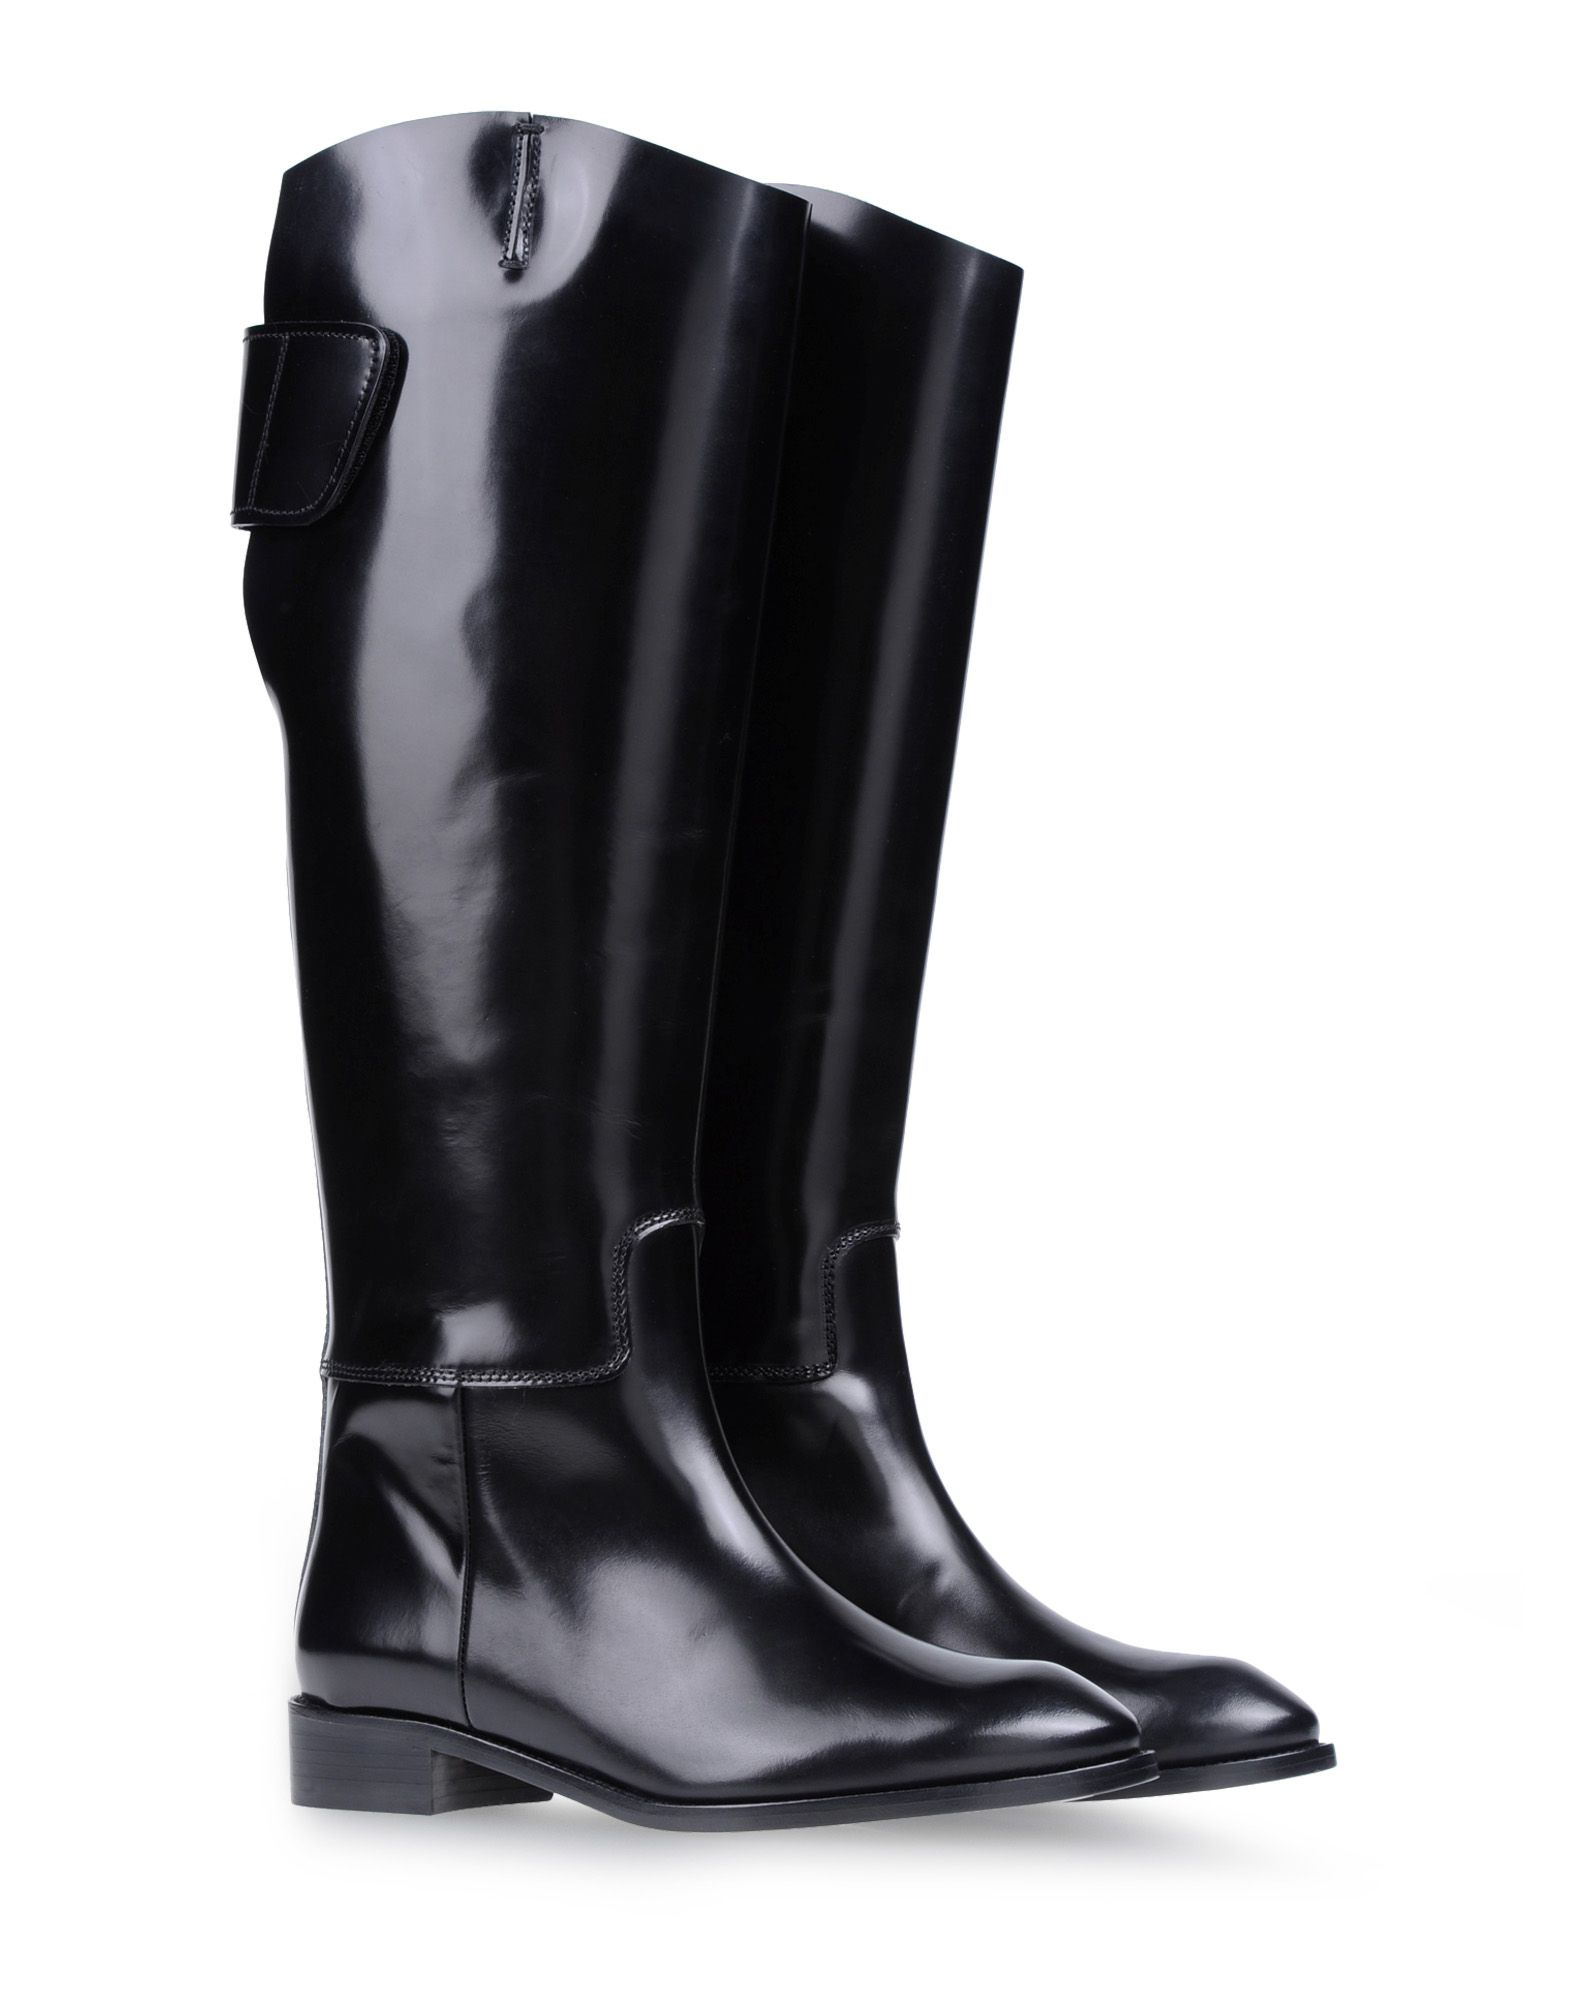 Lyst - Acne Studios Boots in Black